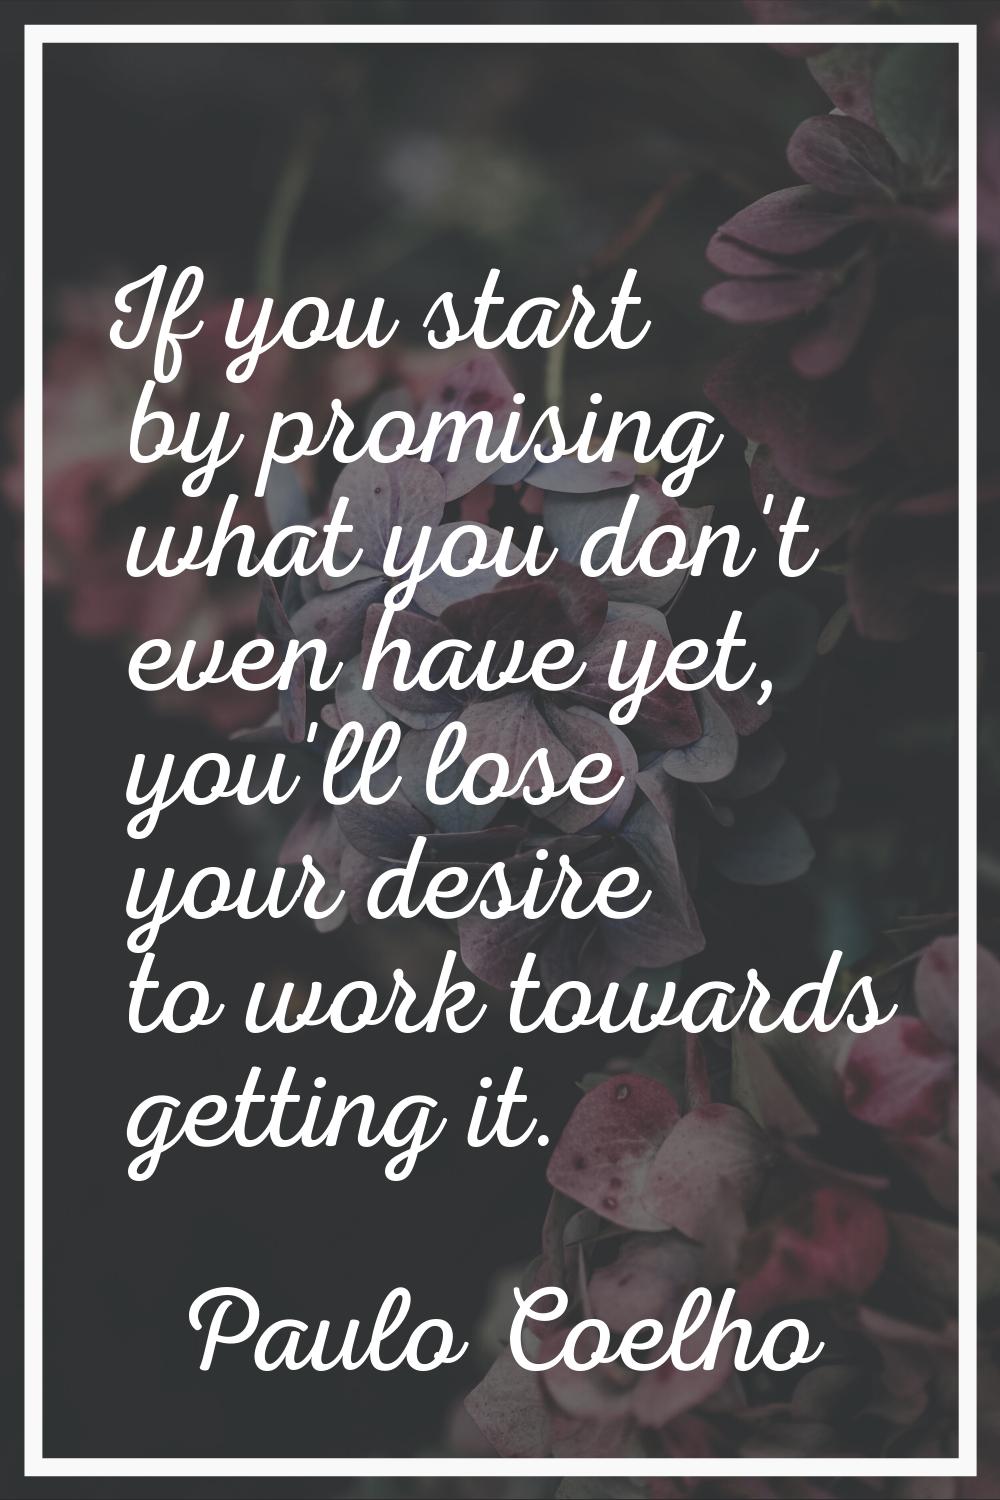 If you start by promising what you don't even have yet, you'll lose your desire to work towards get